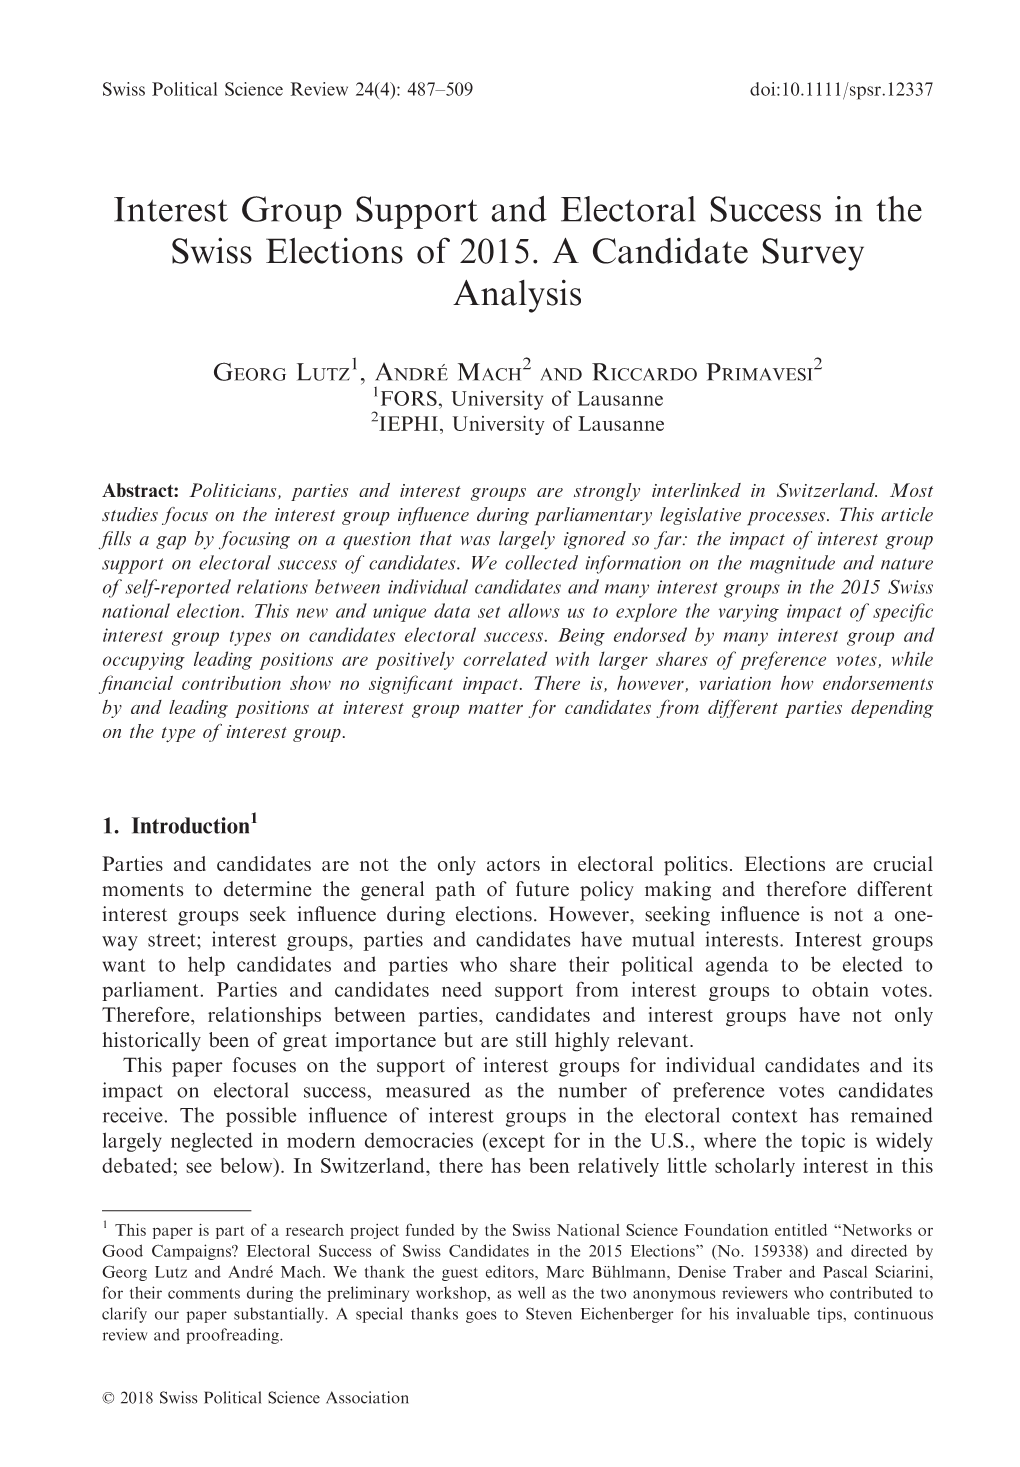 Interest Group Support and Electoral Success in the Swiss Elections of 2015